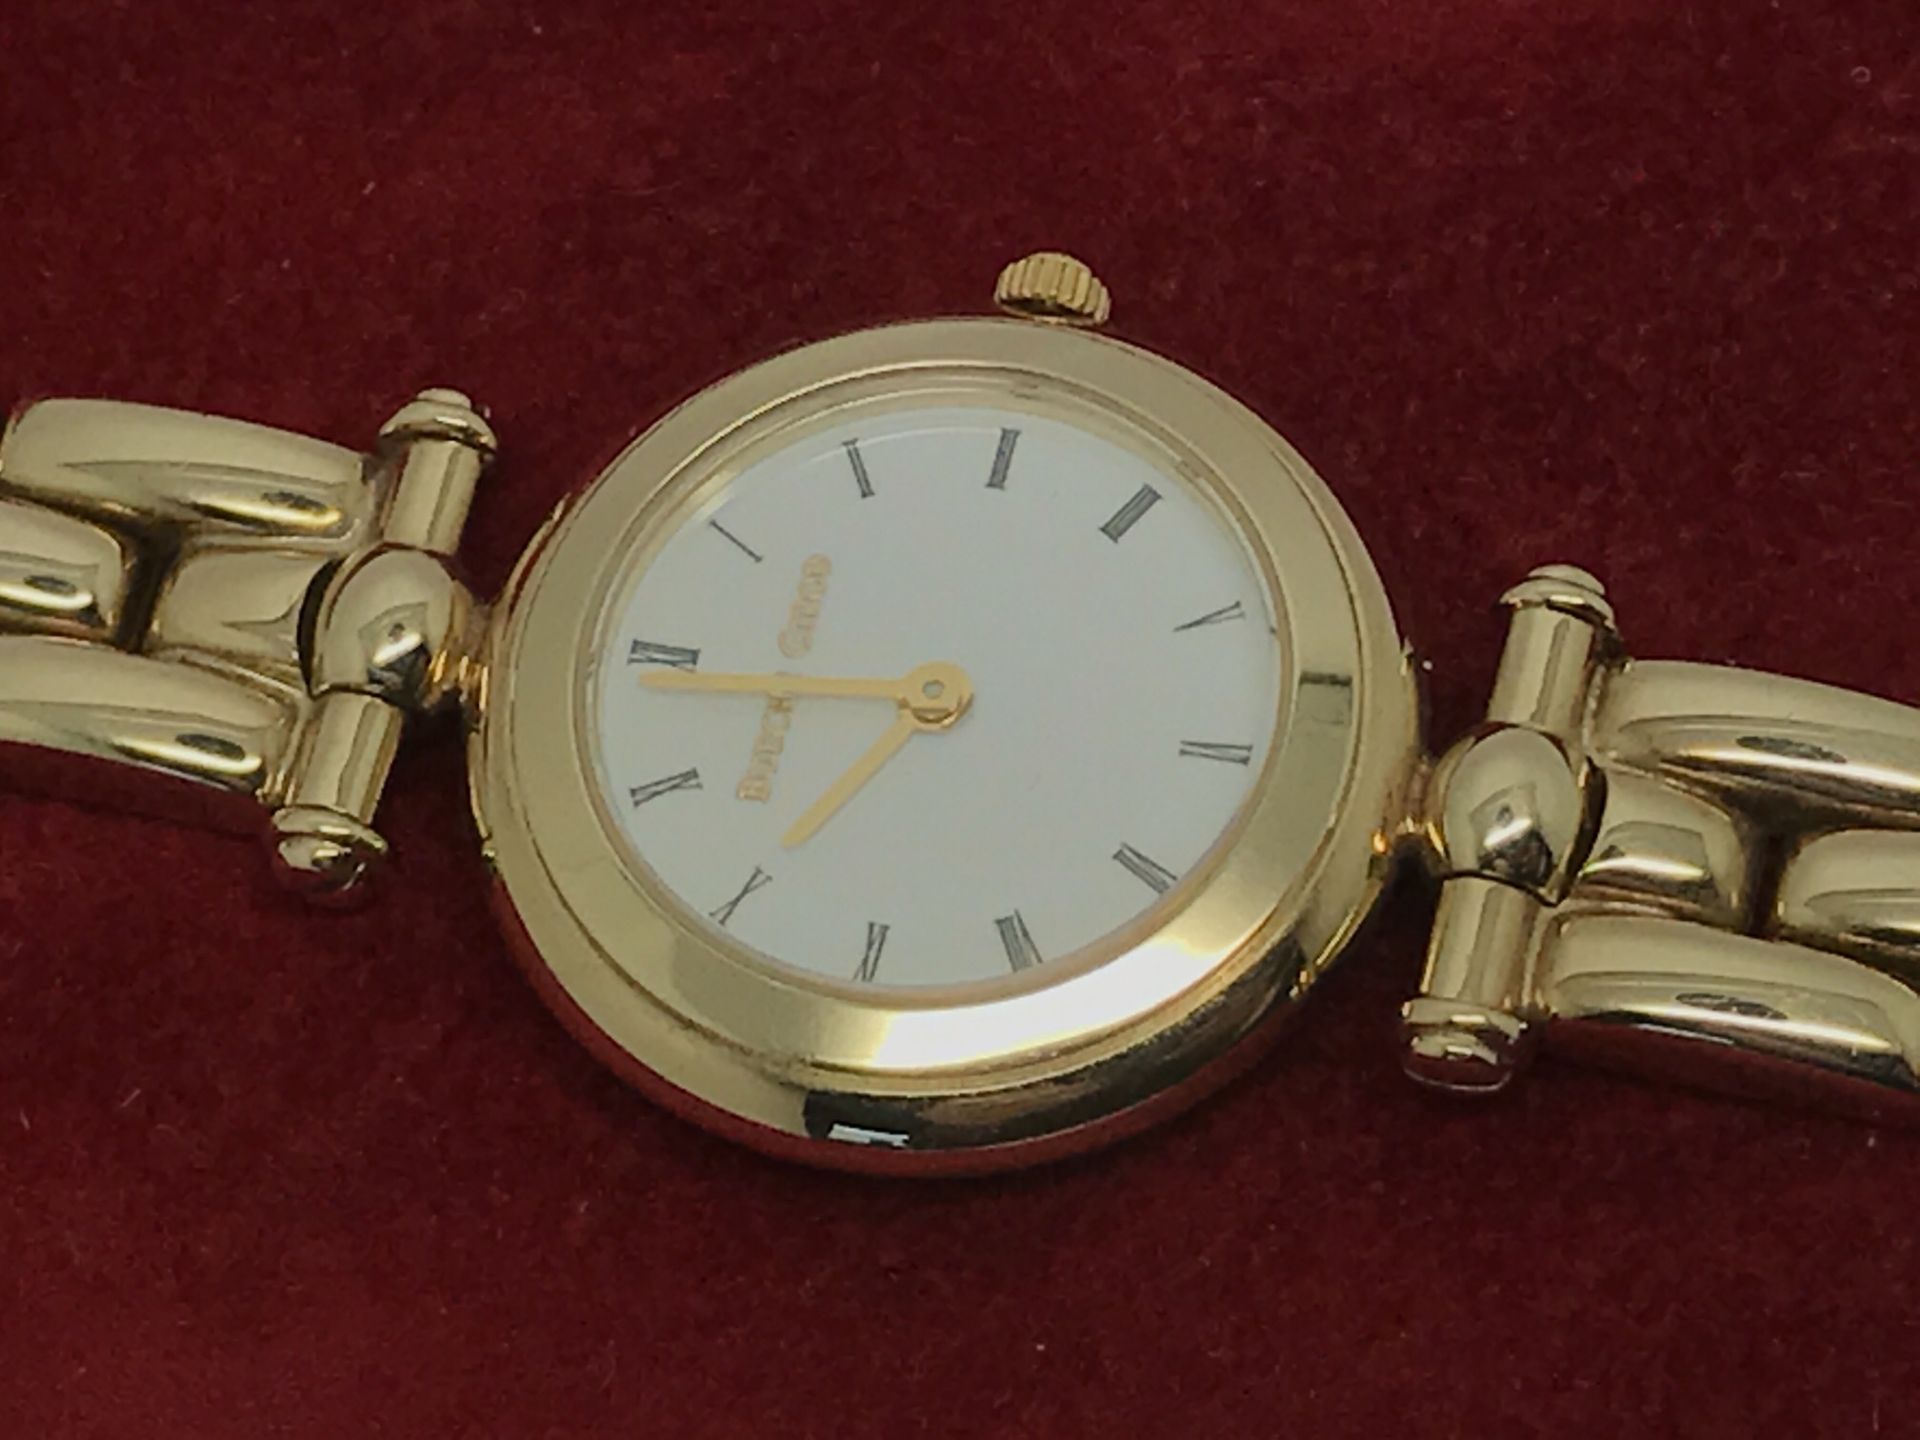 BUECHE GIROD PRE-OWNED 9CT YELLOW GOLD DRESS WATCH - Image 2 of 4